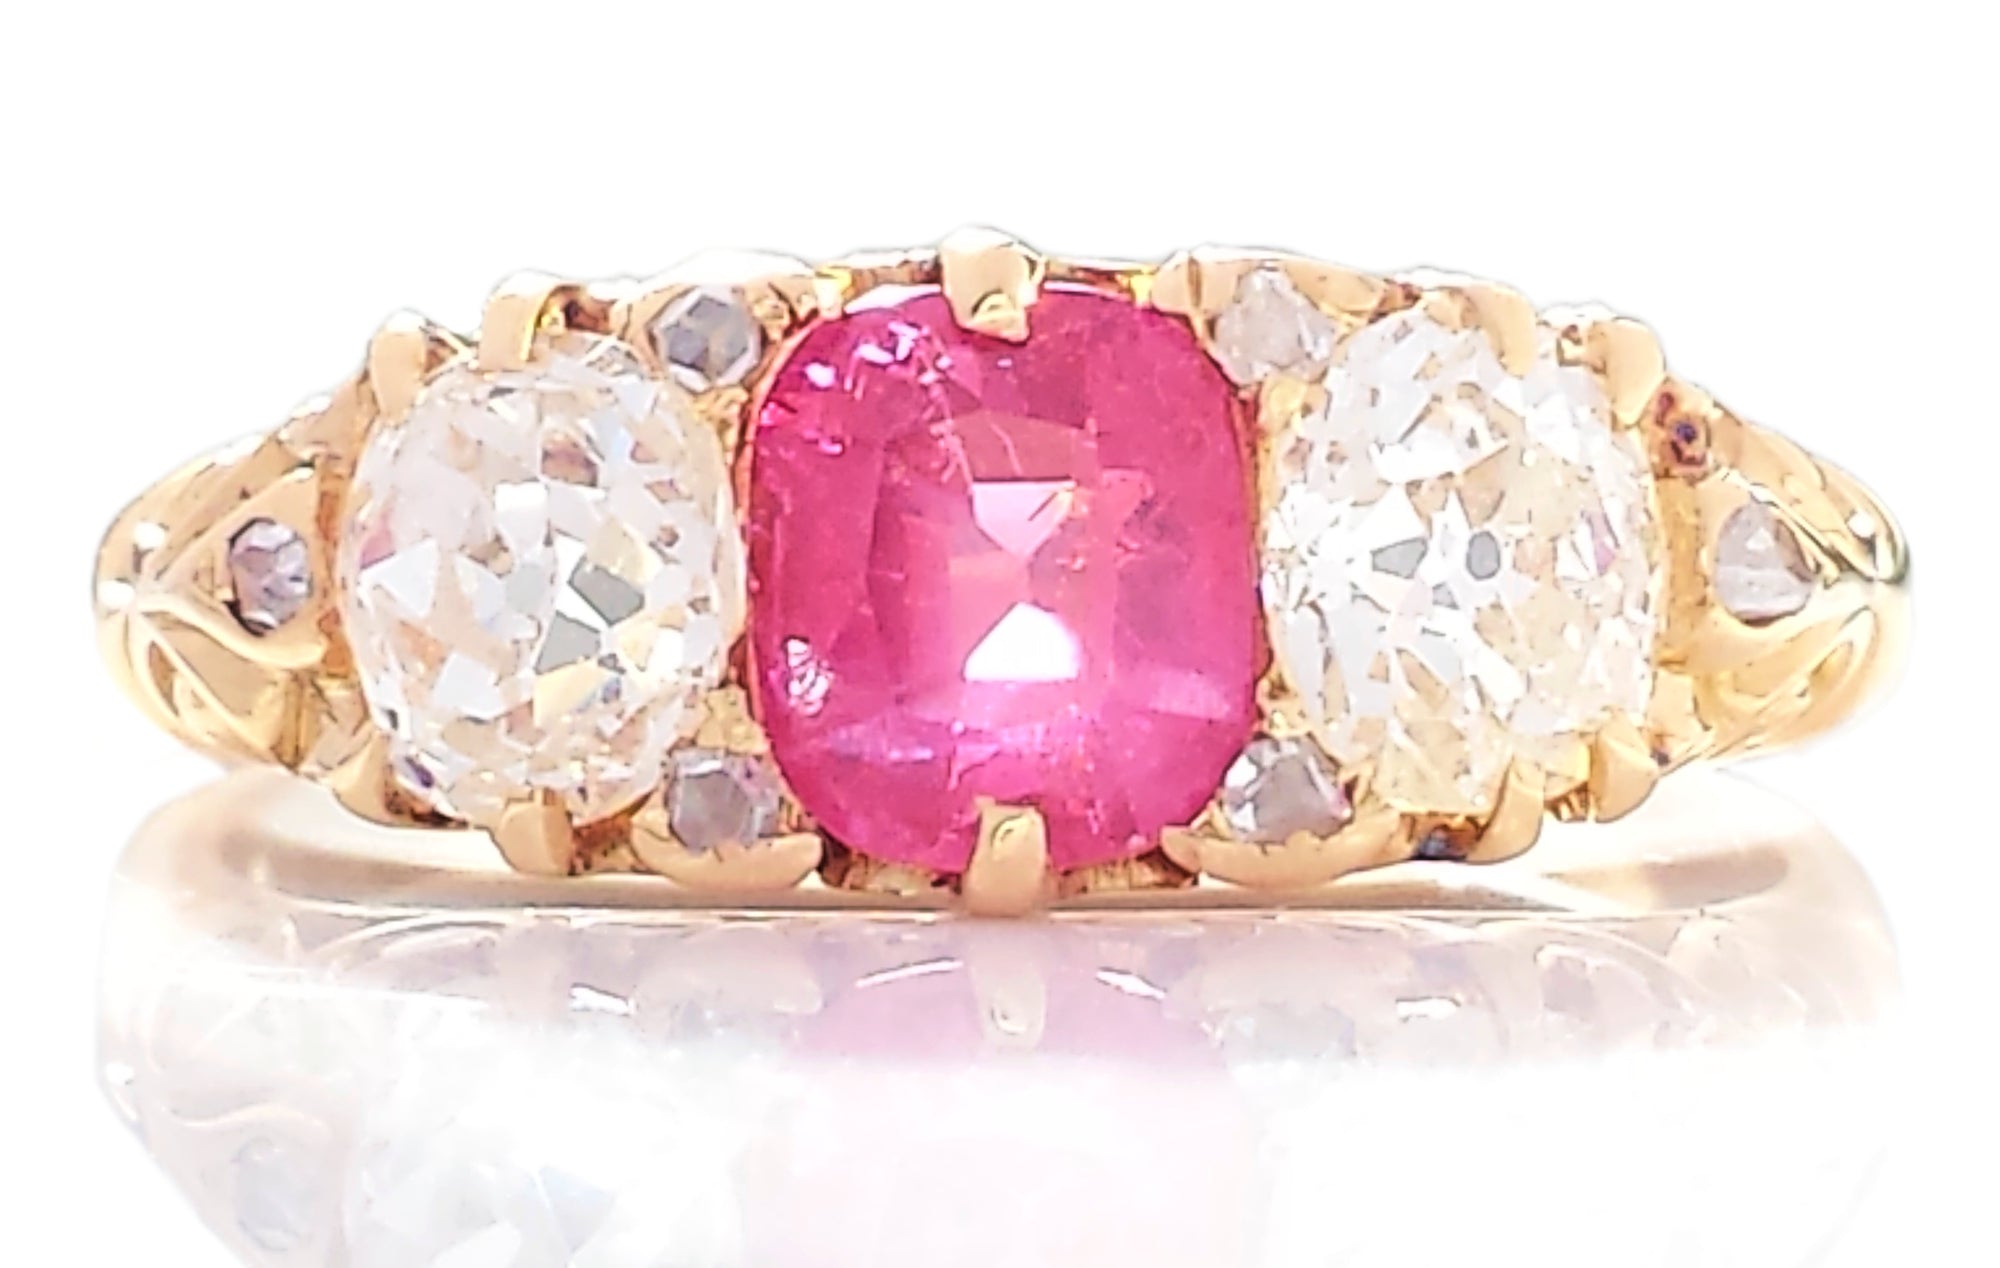 Antique Victorian 3-Stone 1.10ct Burmese Unheated Ruby & Old Cut Diamond Engagement Ring